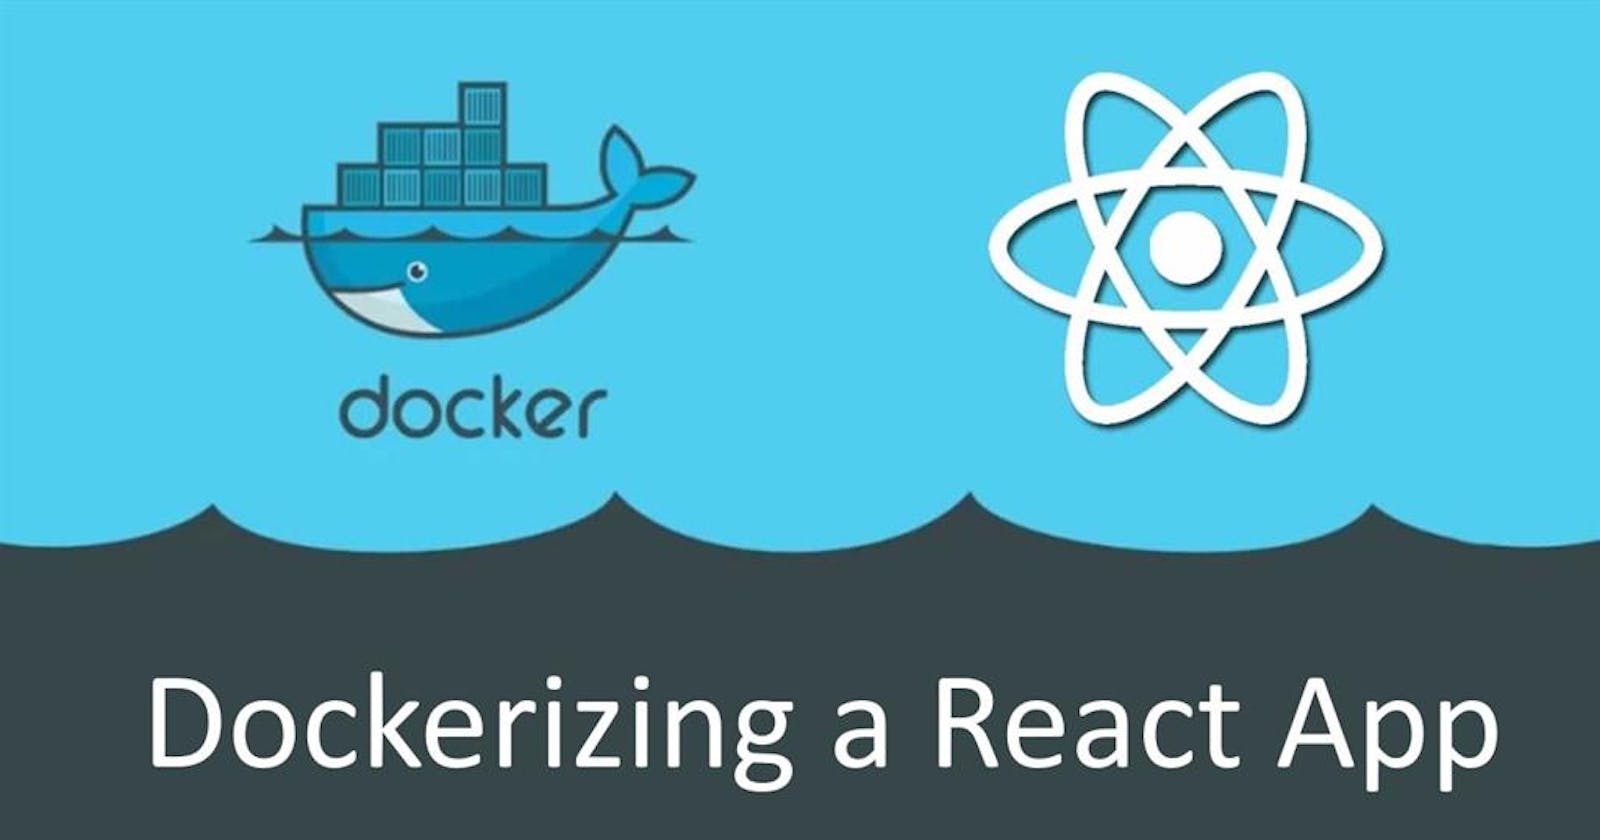 How to Dockerize React App in 5 simple steps?